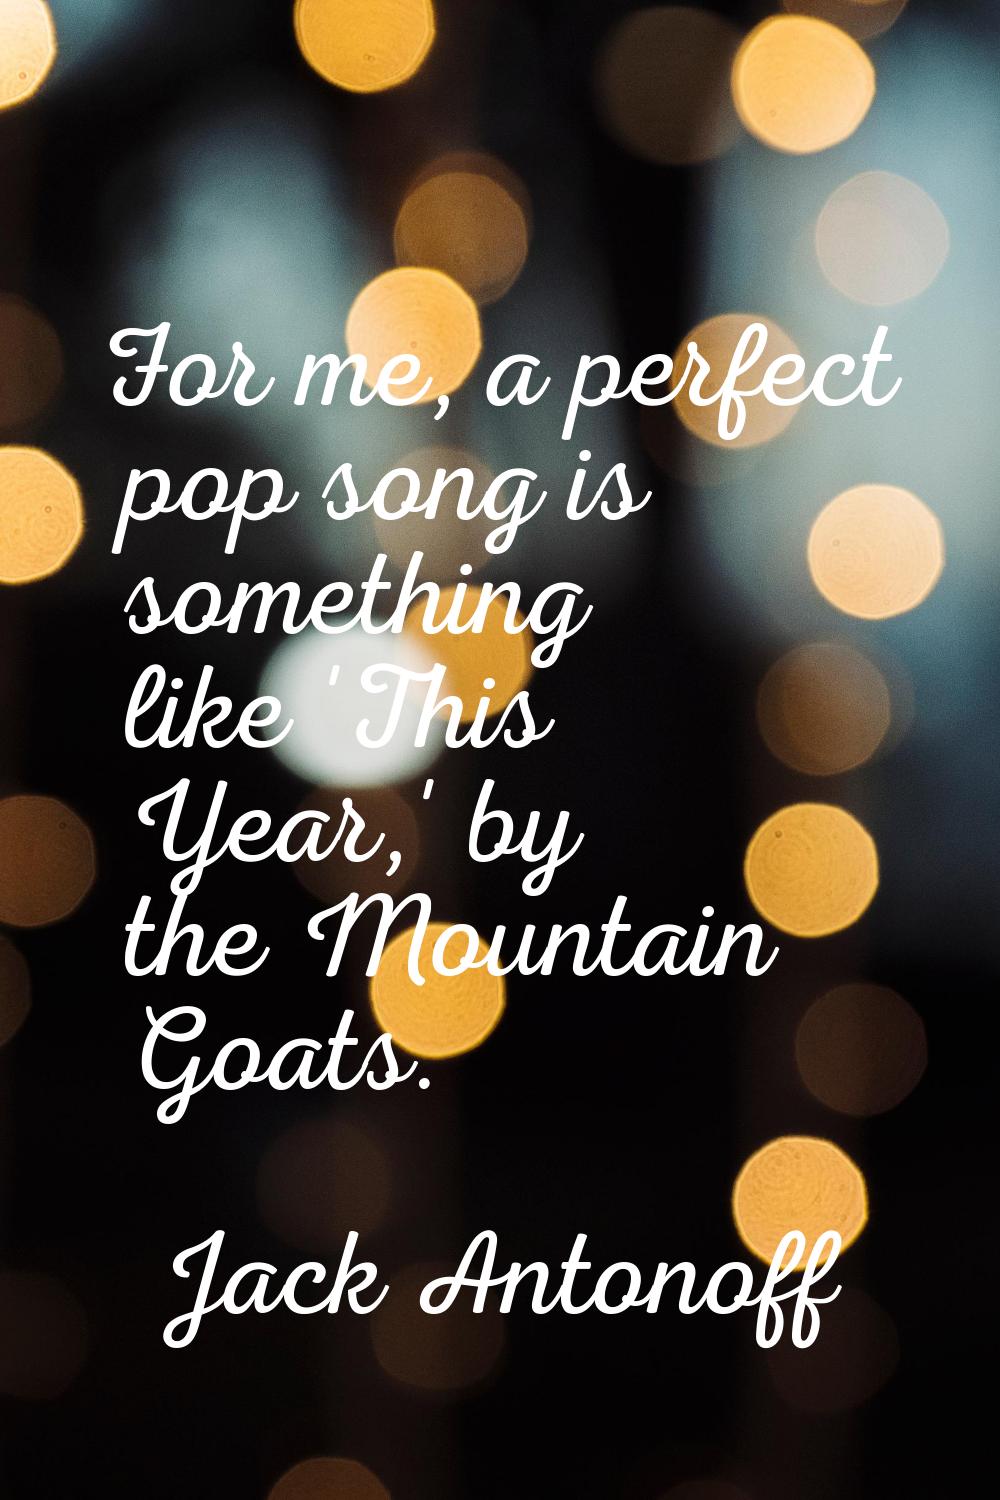 For me, a perfect pop song is something like 'This Year,' by the Mountain Goats.